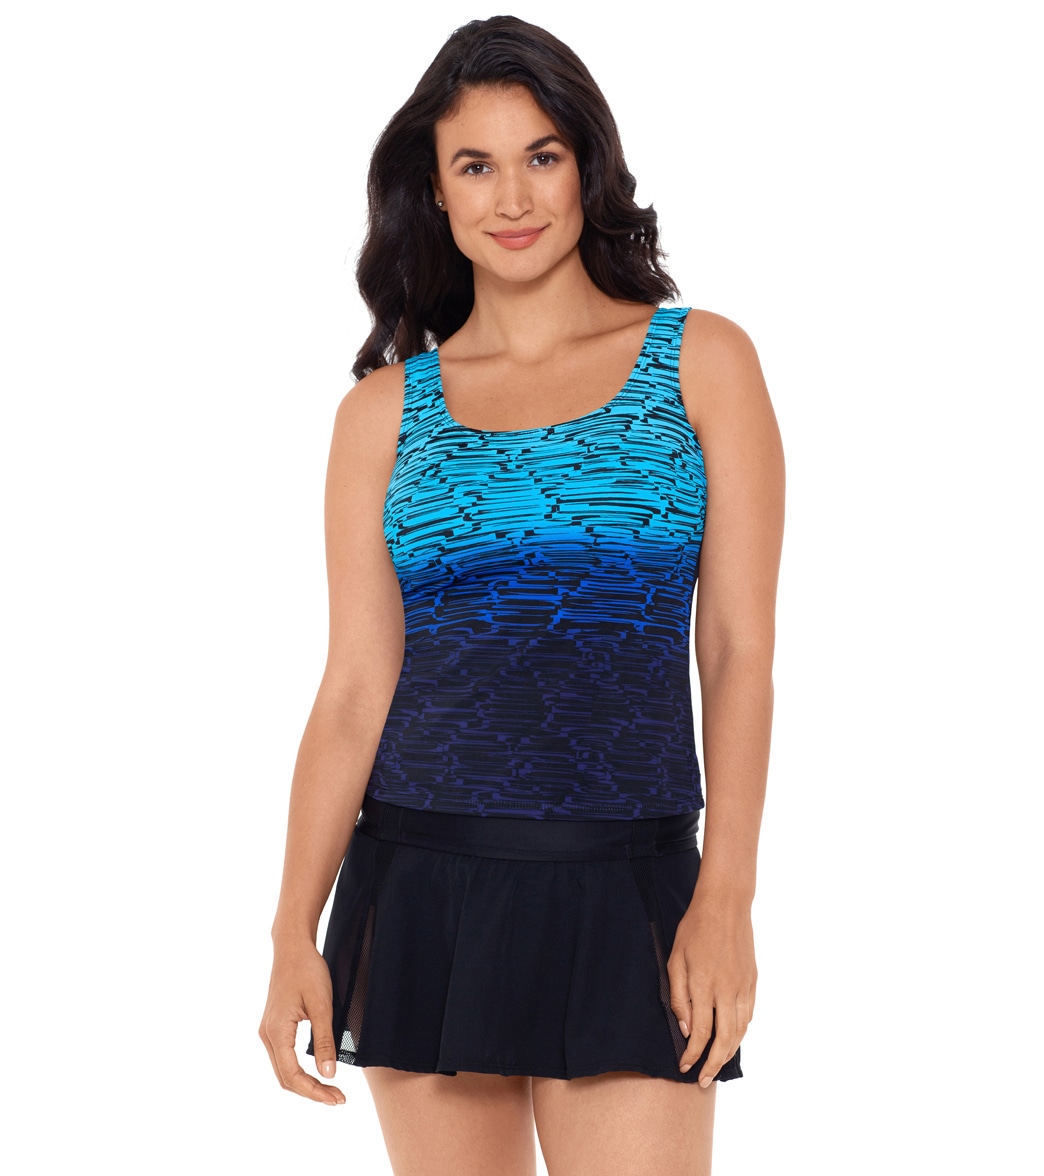 Reebok Women's Stacked To The Max Scoop Neck Chlorine Resistant Tankini Top - Blue/Black 12 - Swimoutlet.com